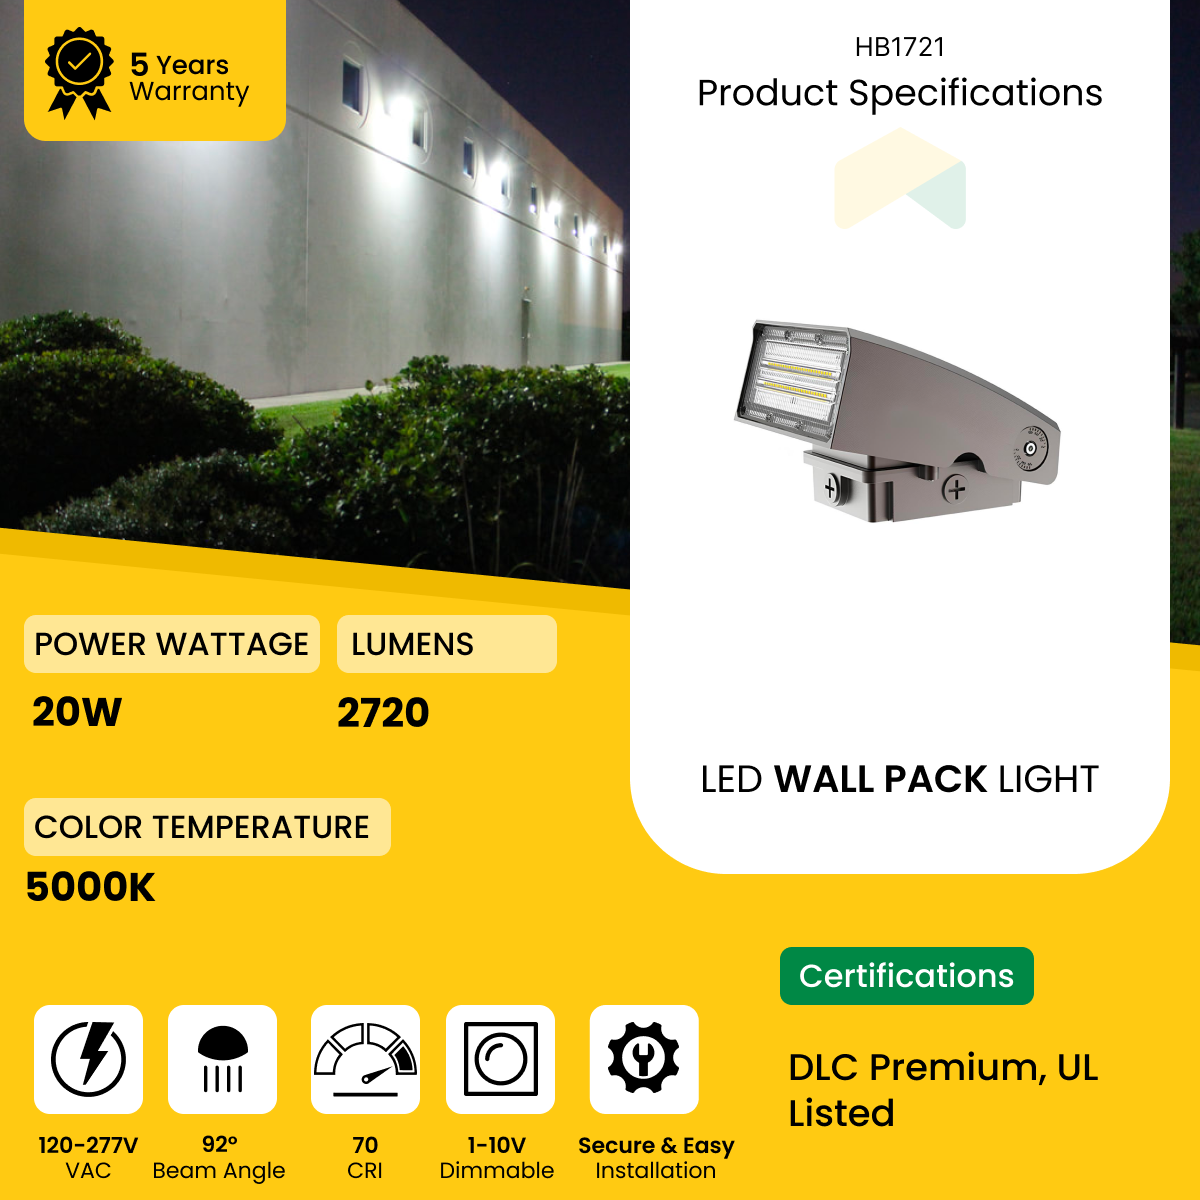 LED Adjustable Wall Pack 20W - 5000K - 2720 Lumens - AC120-277V 0-10V Dimmable - IP66 - UL Listed - DLC Premium Listed - 5 Years Warranty